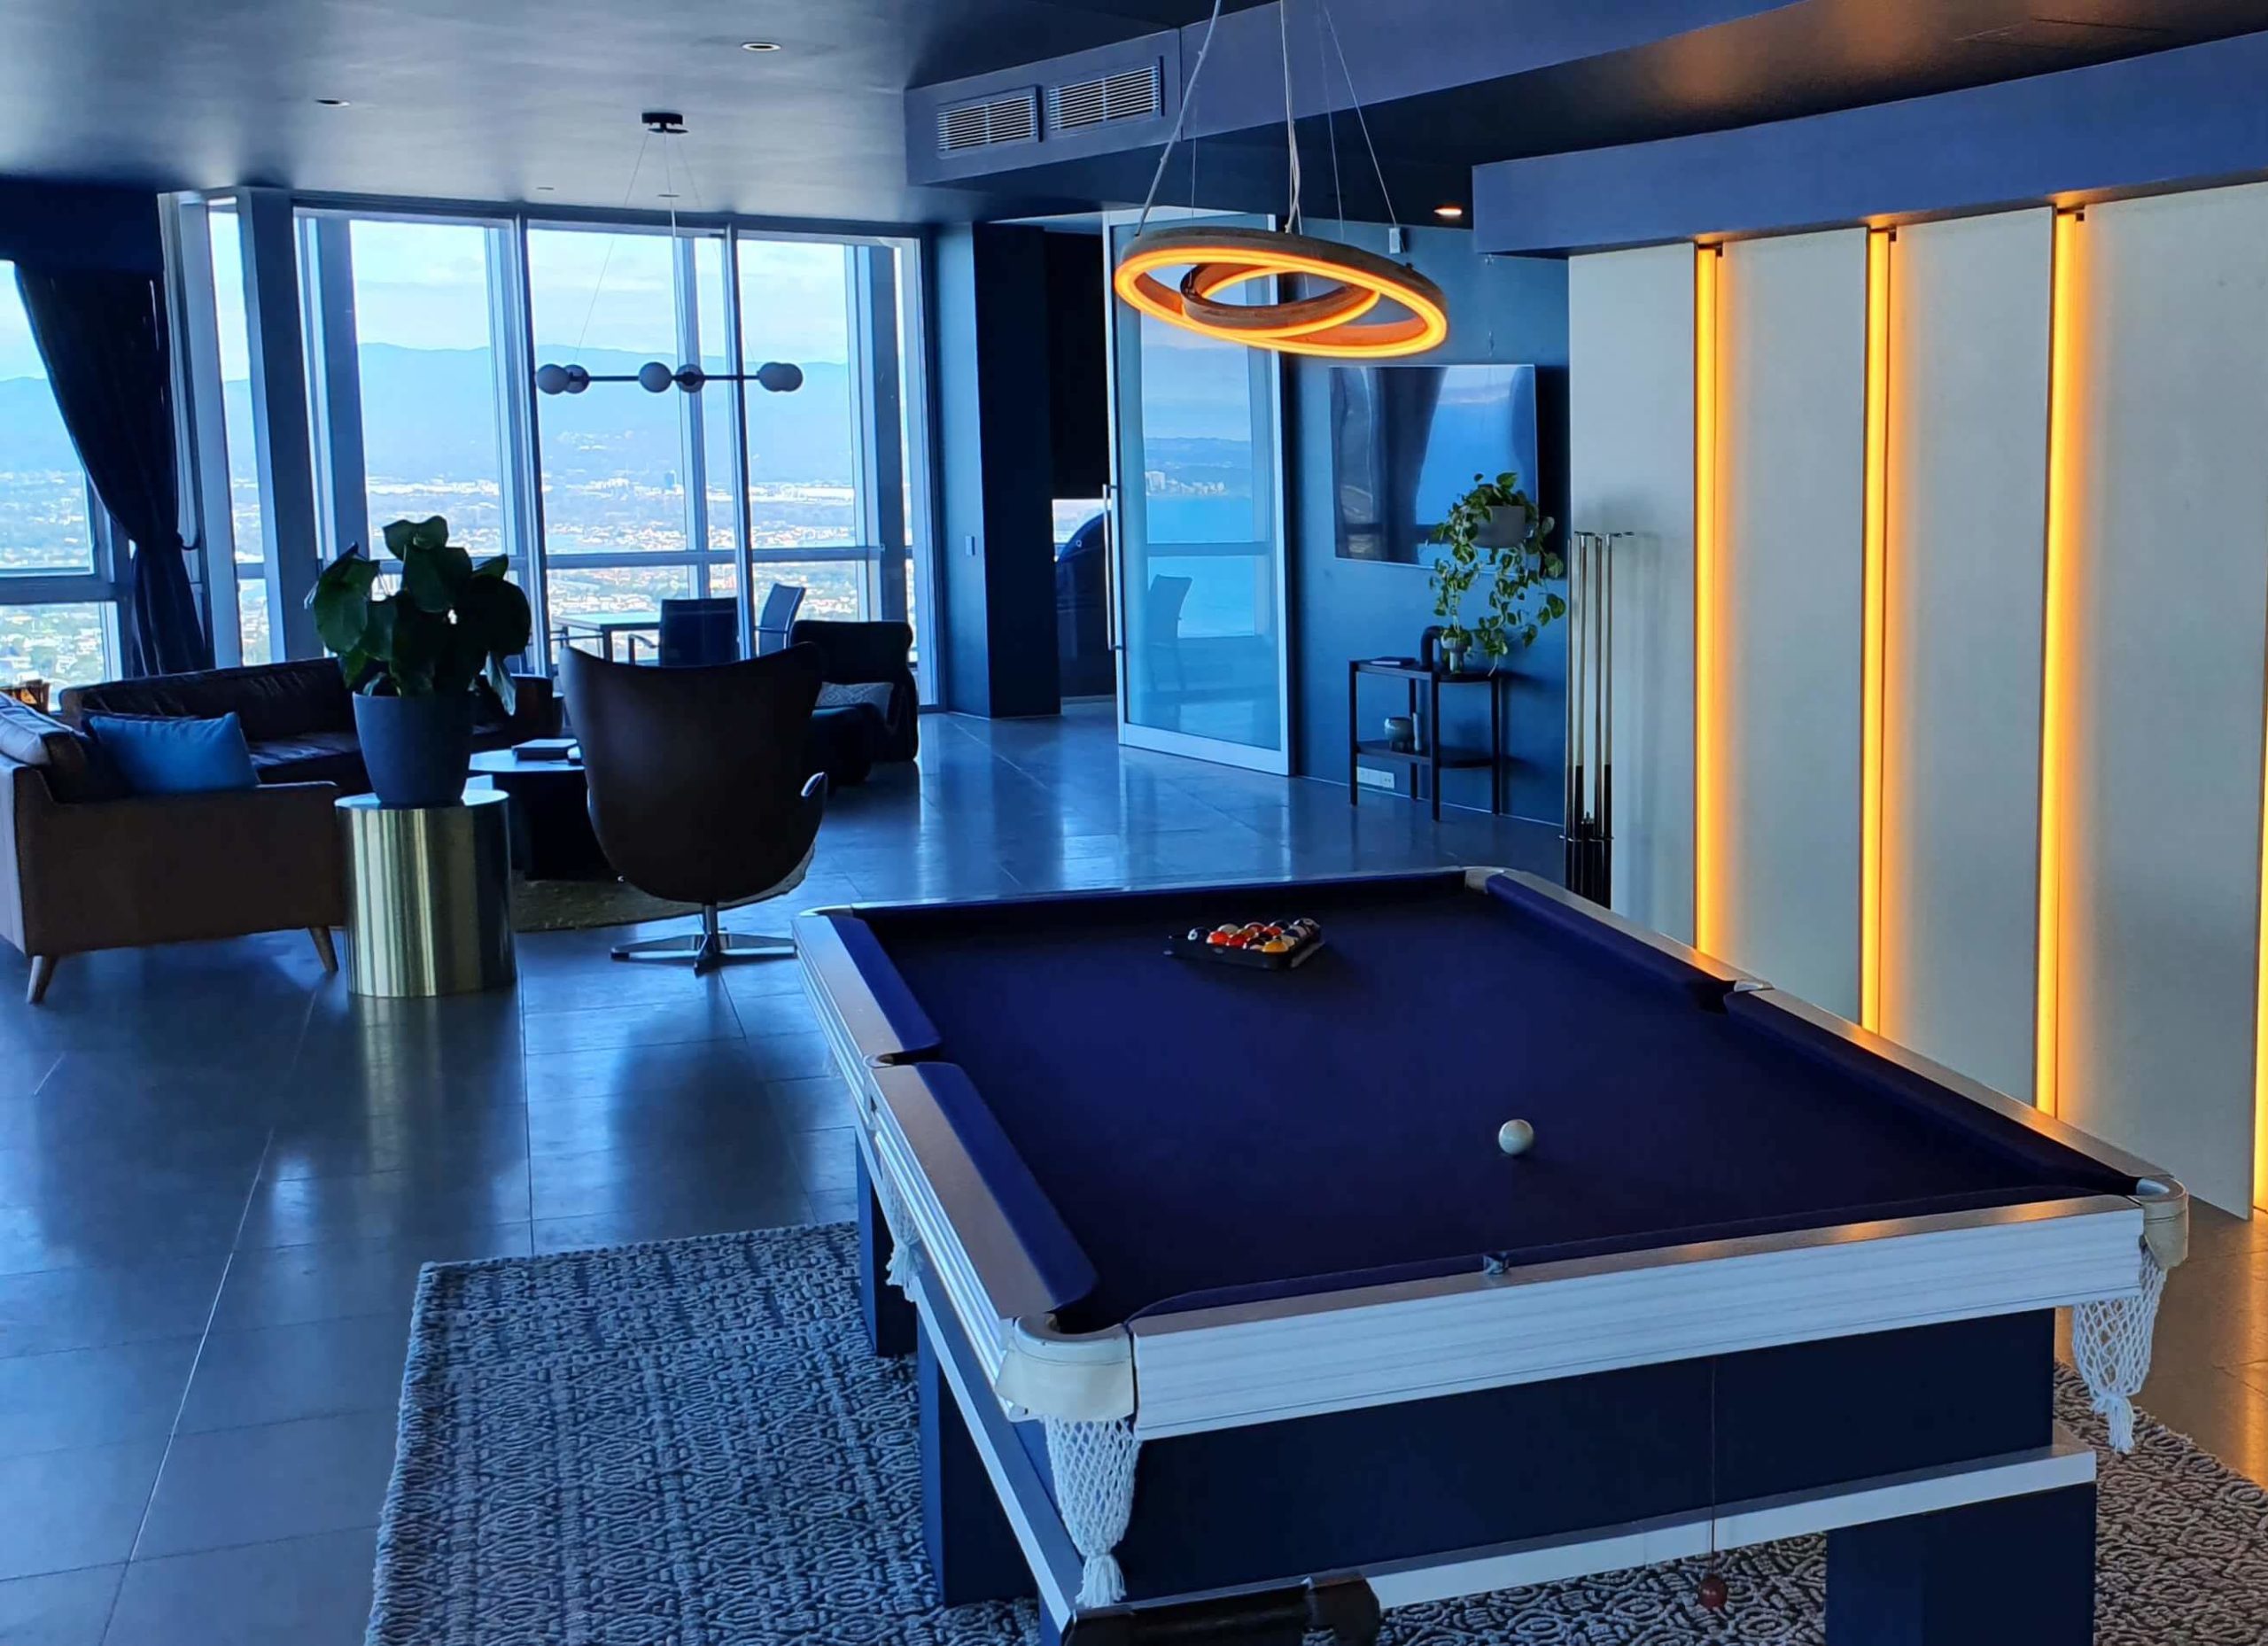 Q1 Resort & Spa - Presidential Penthouse | Pool Table